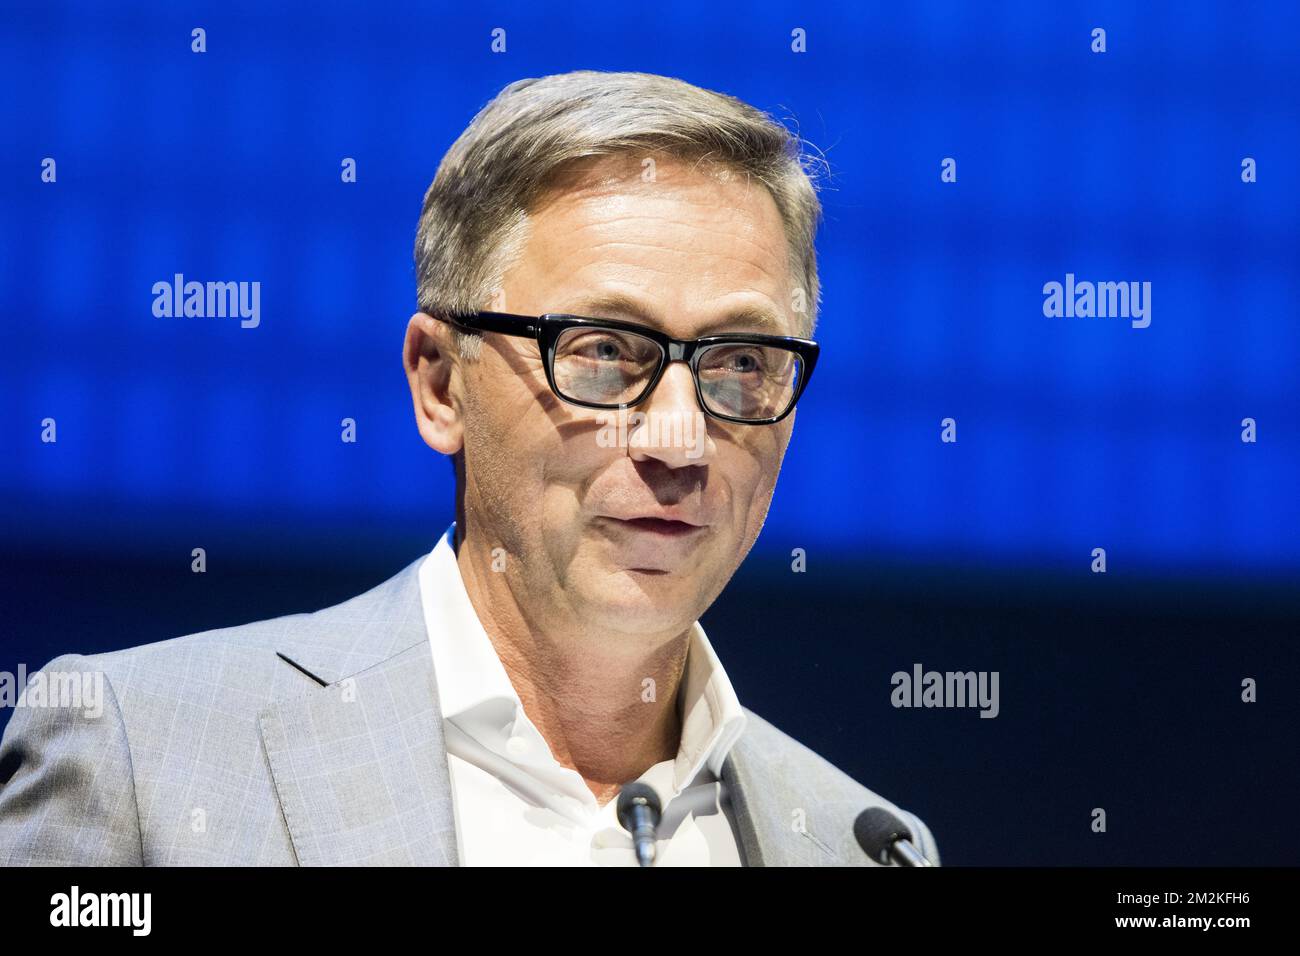 Artexis Group CEO Eric Everard pictured during the award ceremony for ...